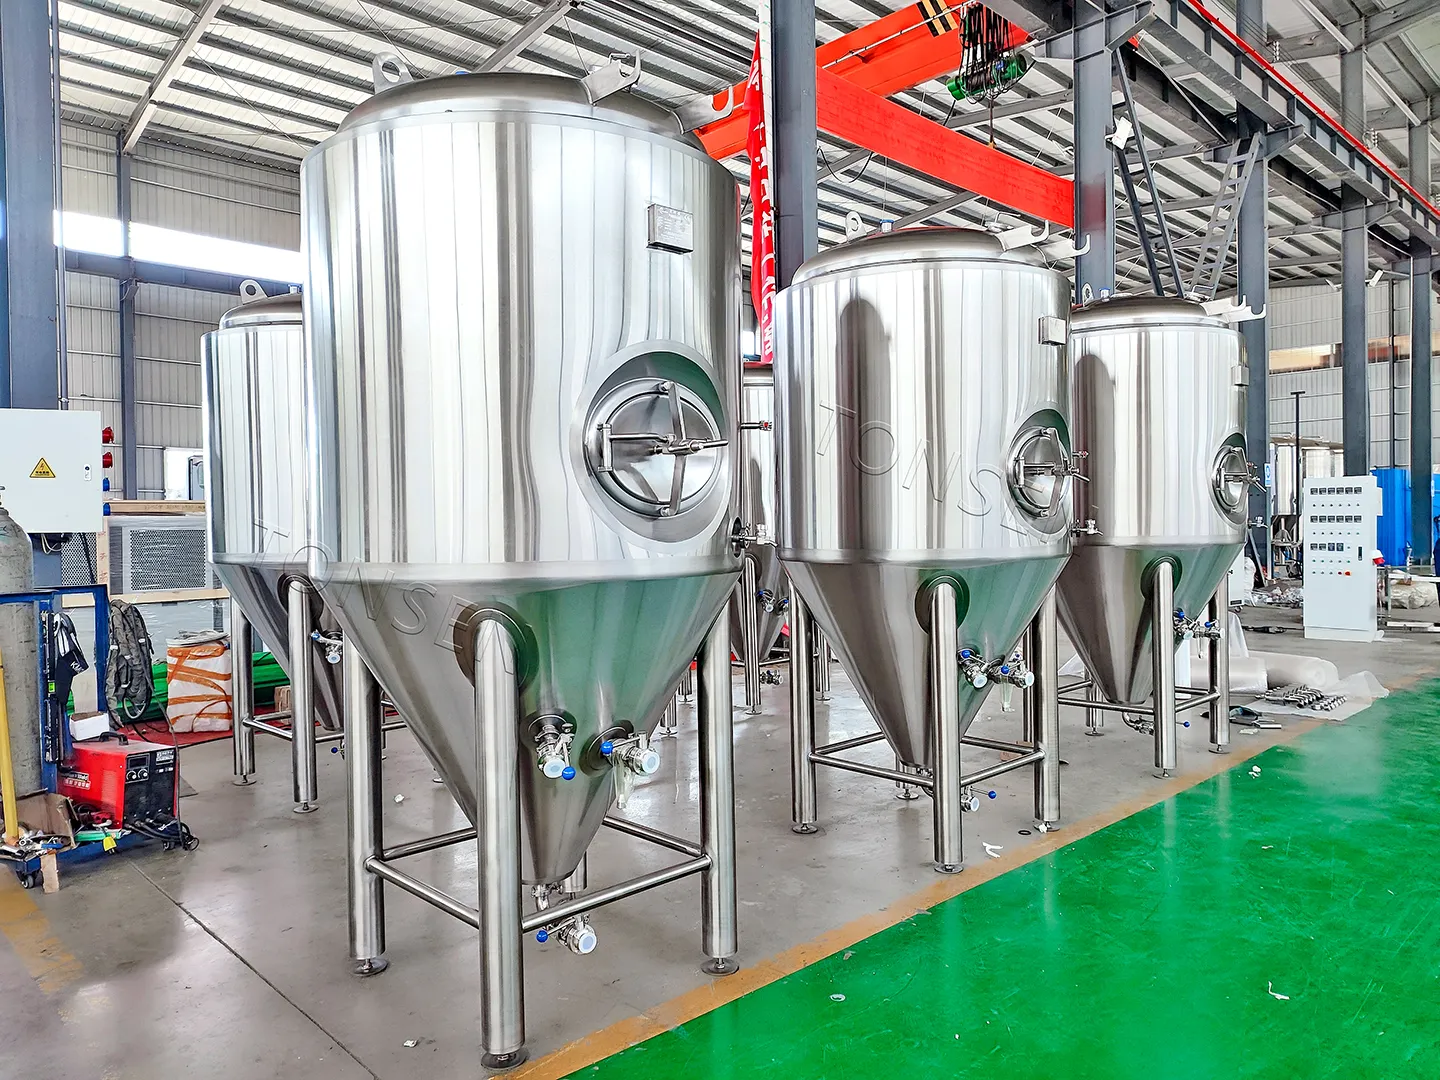 Tonsen beer fermenter microbrewery fermentation tank brewery beer brewing plant equipment turnkey project